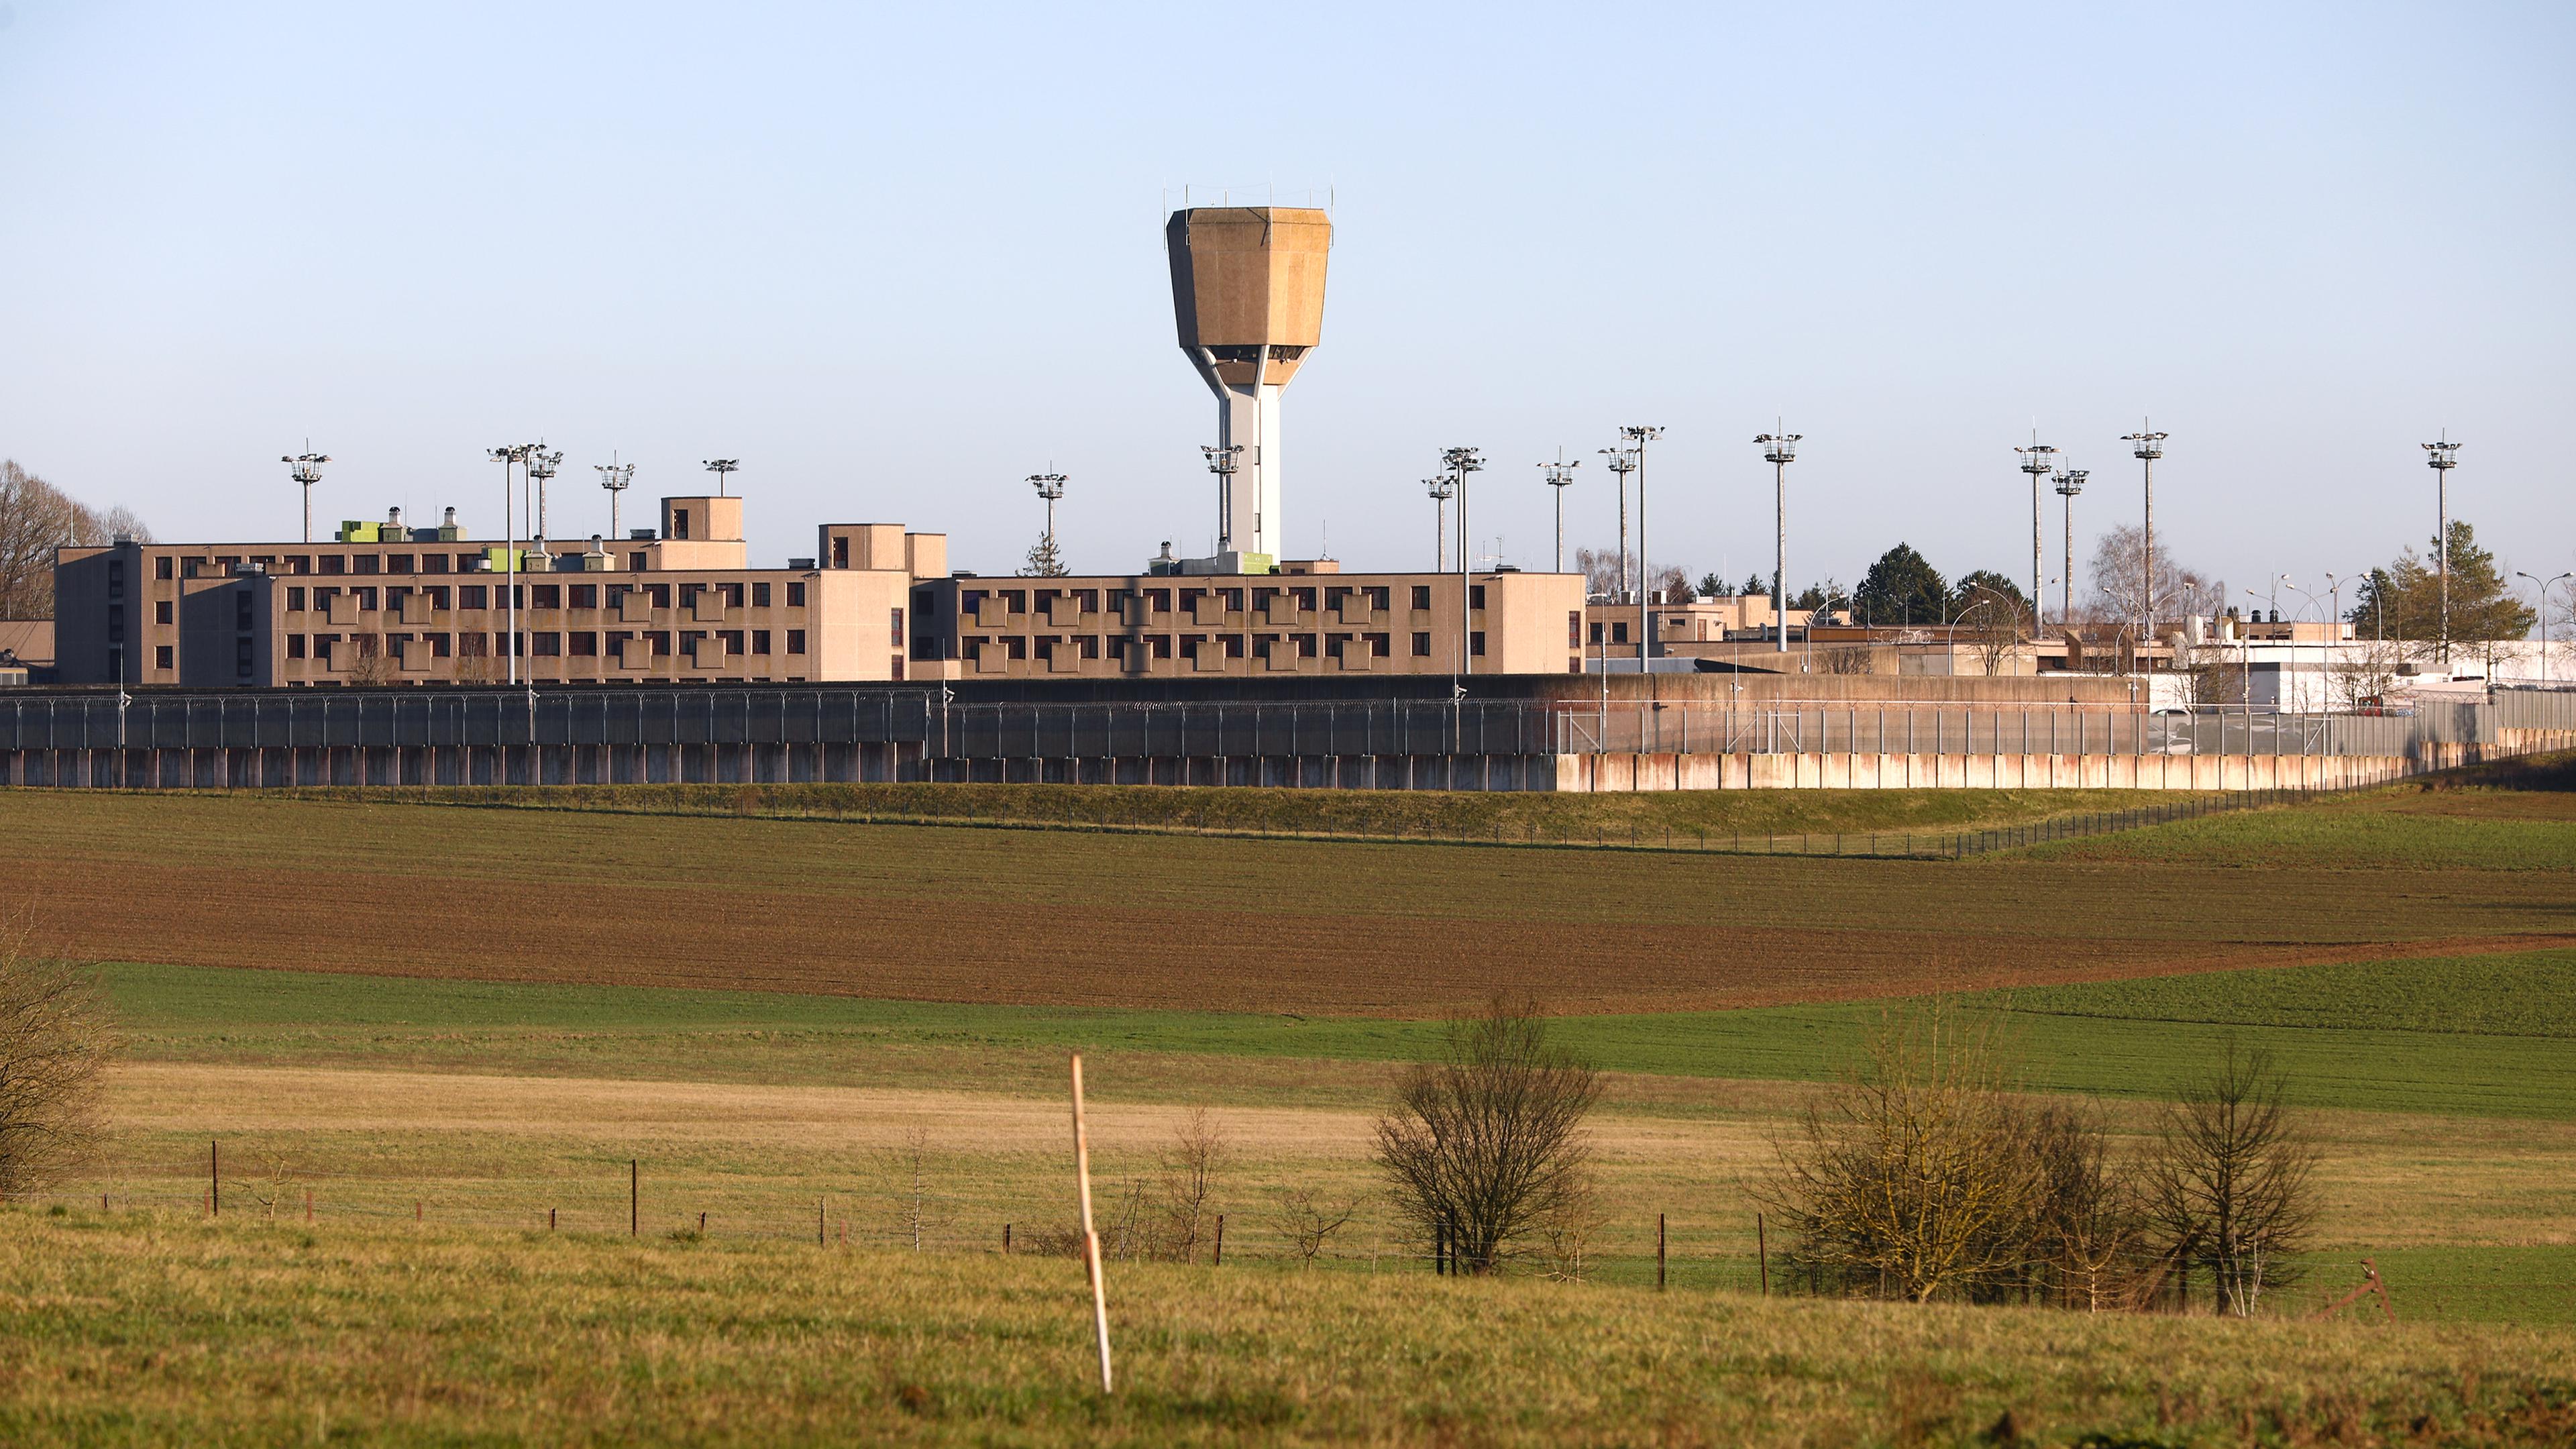 With 284 inmates, Schrassig remains the largest prison in the country.